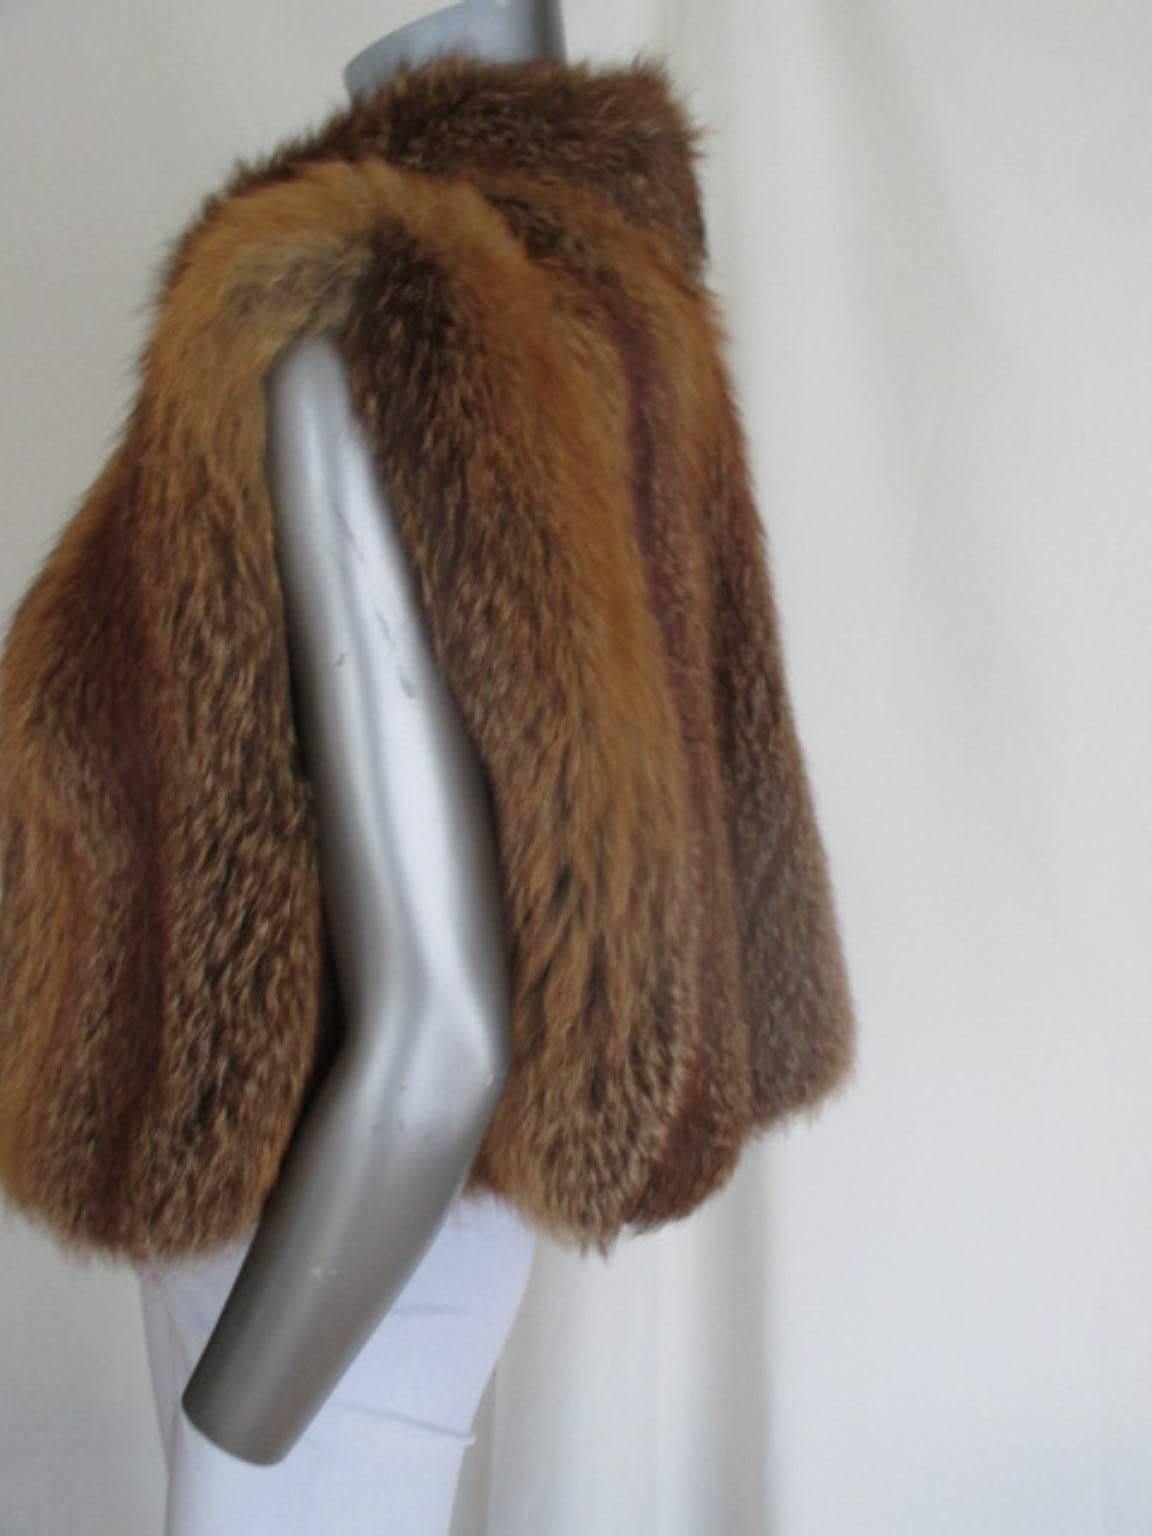 This vintage vest is made from red fox fur, it has no pockets or closing hooks.
Appears to be medium, please refer to the measurements in the description.
Please note that vintage items are not new and therefore might have minor imperfections. 